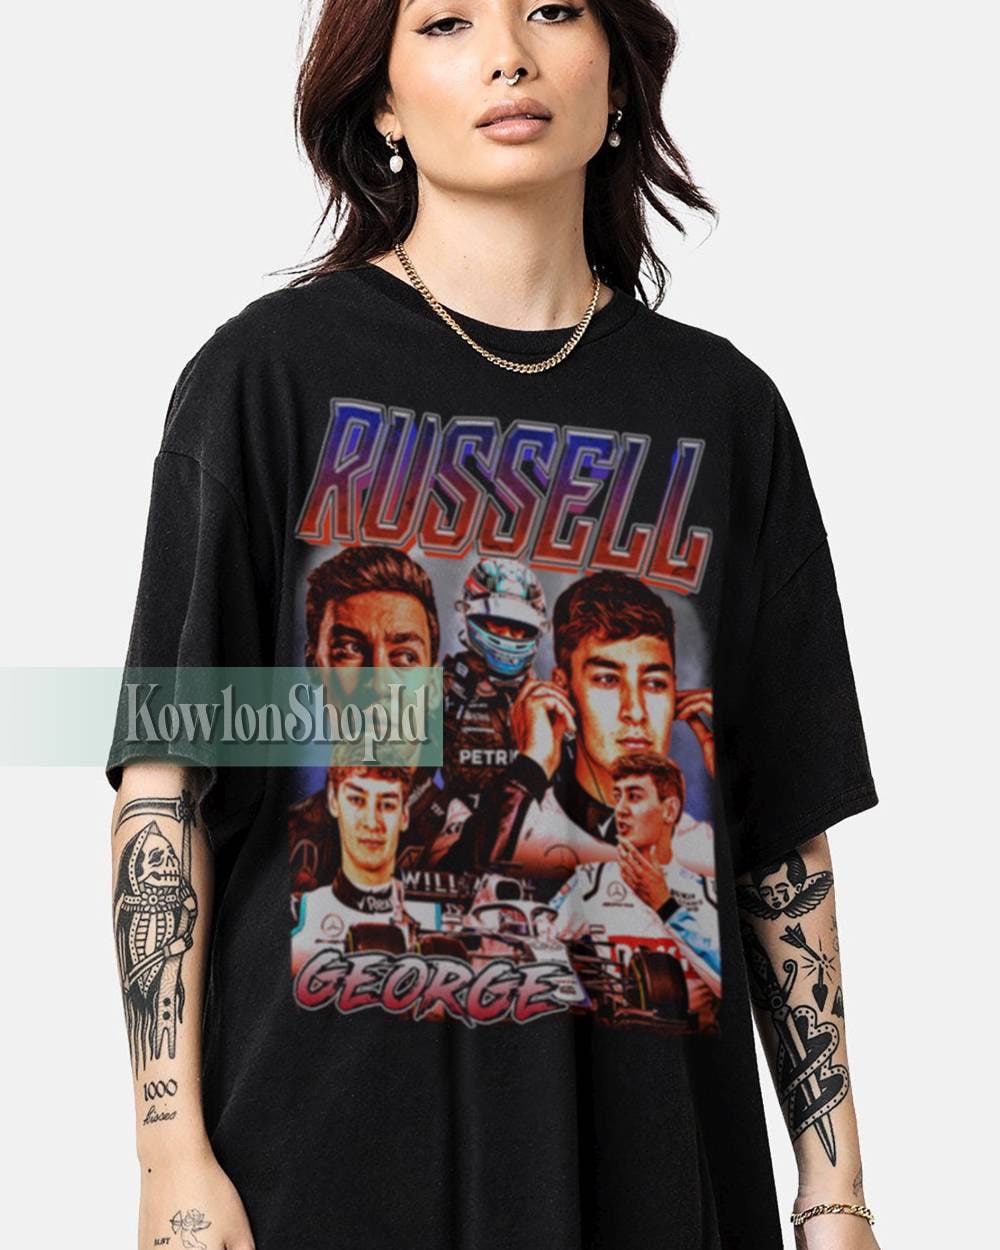 Discover George Russell Professional Driver Racing 90s Vintage Bootleg Unisex Rap Tshirt